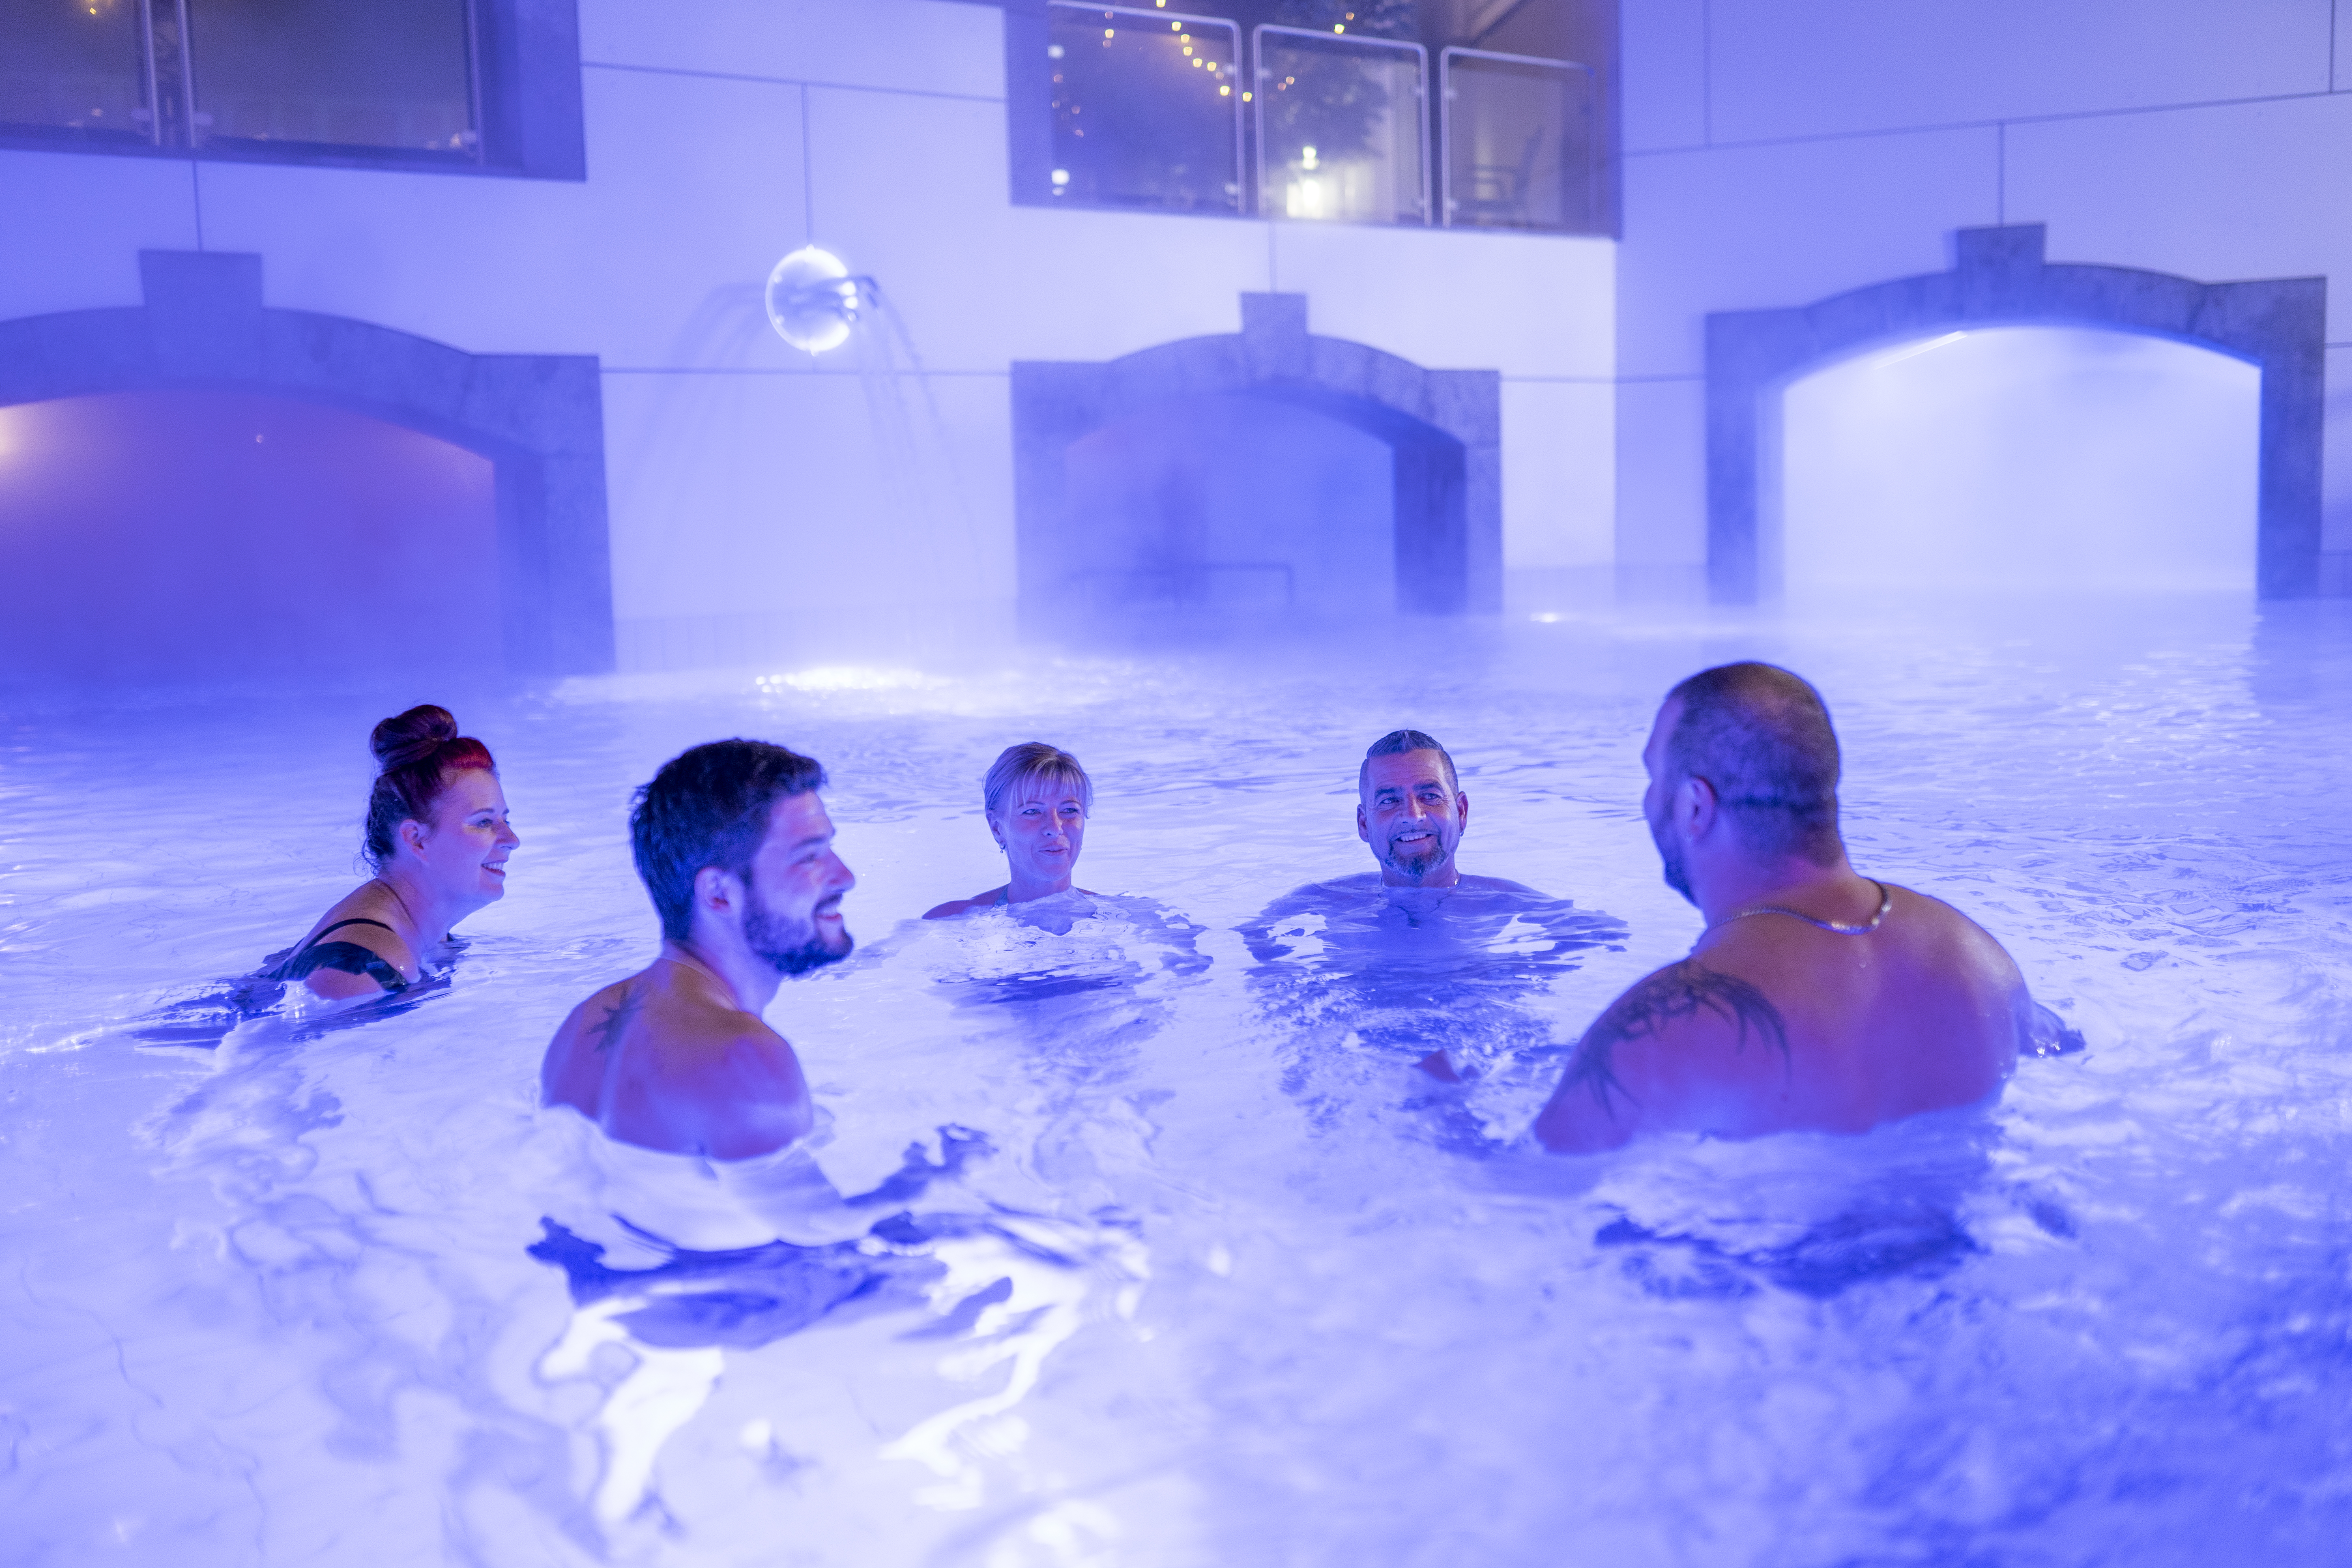 https://www.thermeeins.de/images/Therme-Eins/Slider/01_2022_Therme1_2804.jpg